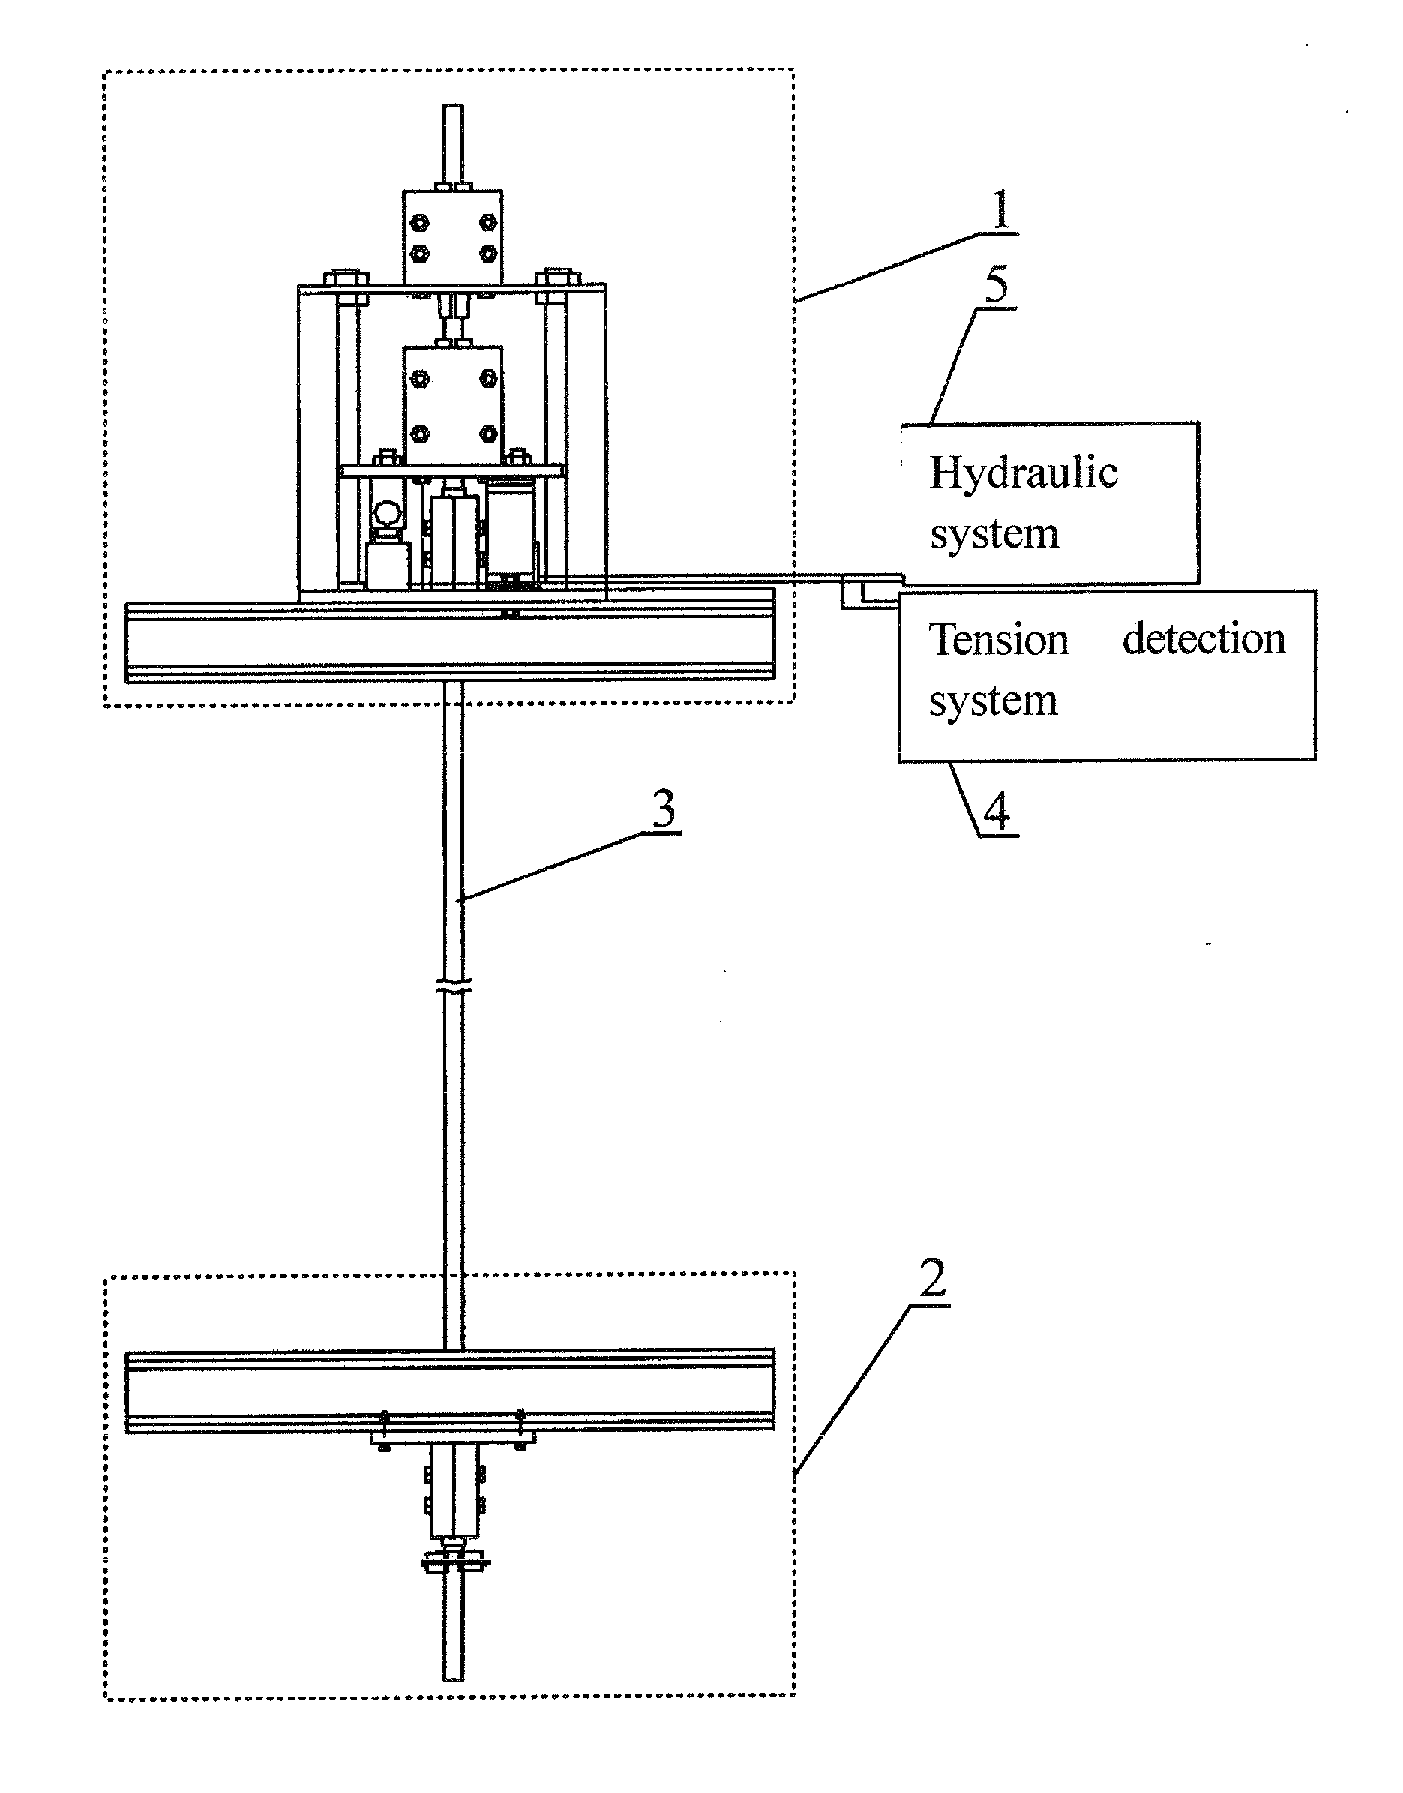 Apparatus and method for automatically adjusting tension on mining elevator flexible guide rail